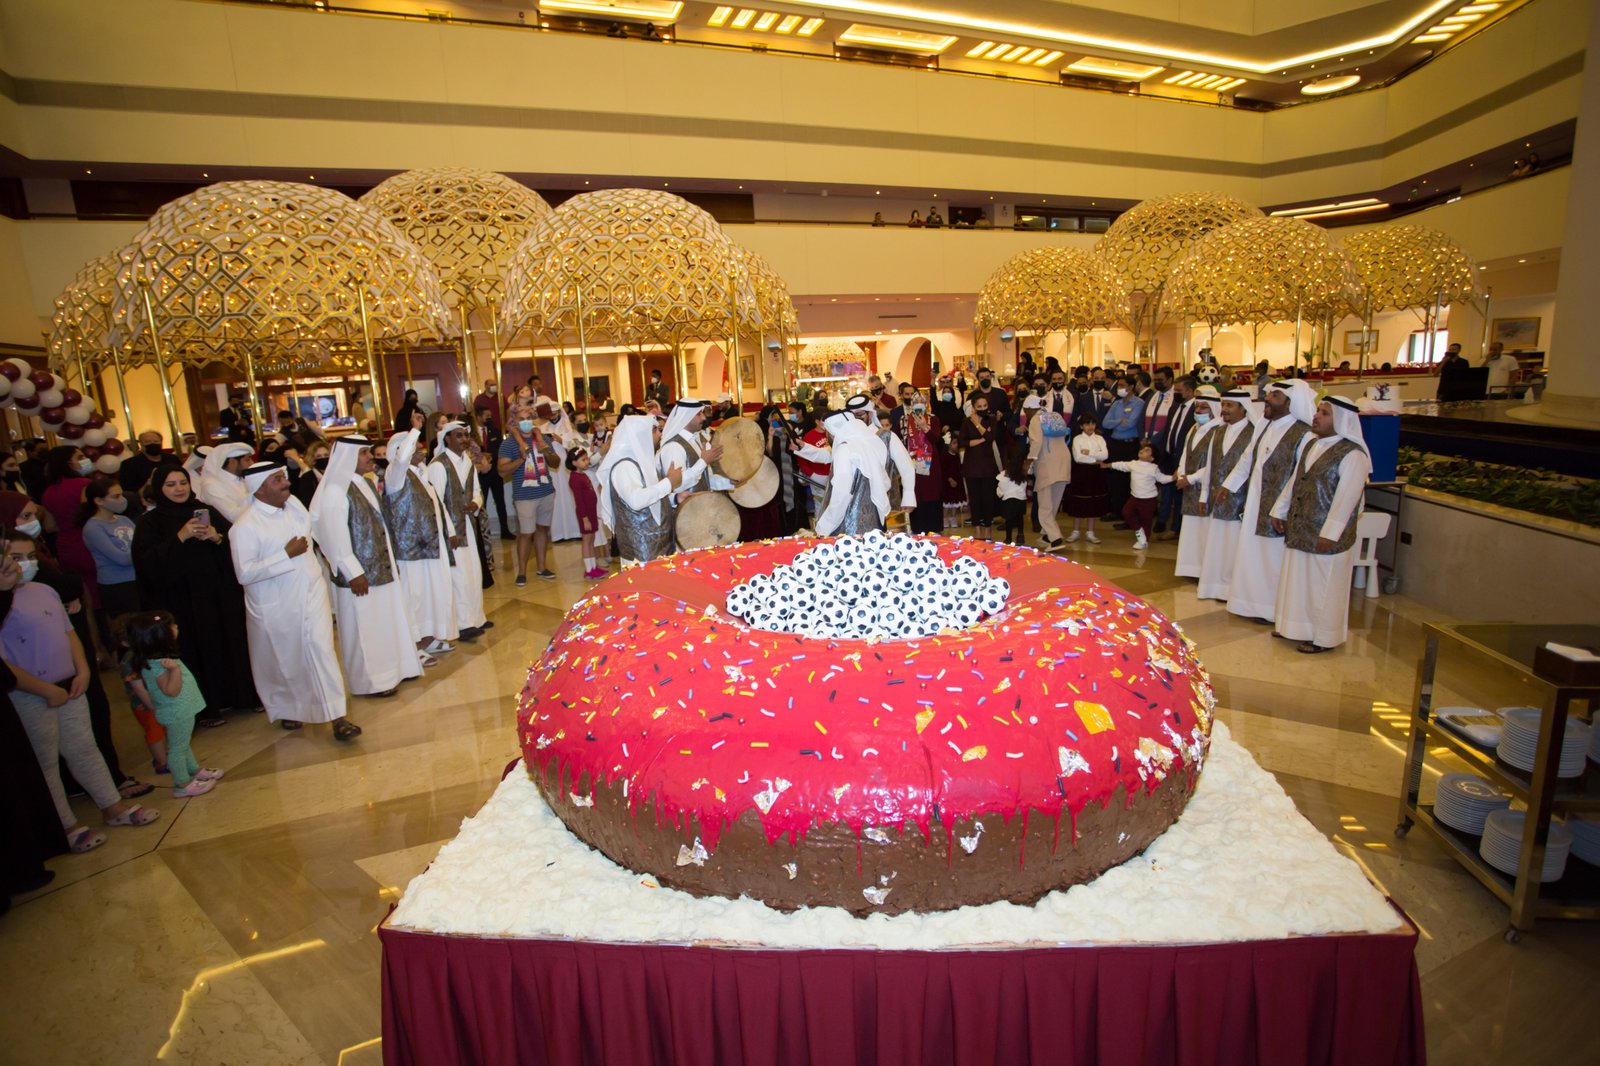 Sheraton Grand Doha celebrated Qatar National Day 2022 with a 2022 kg giant cake cutting ceremony